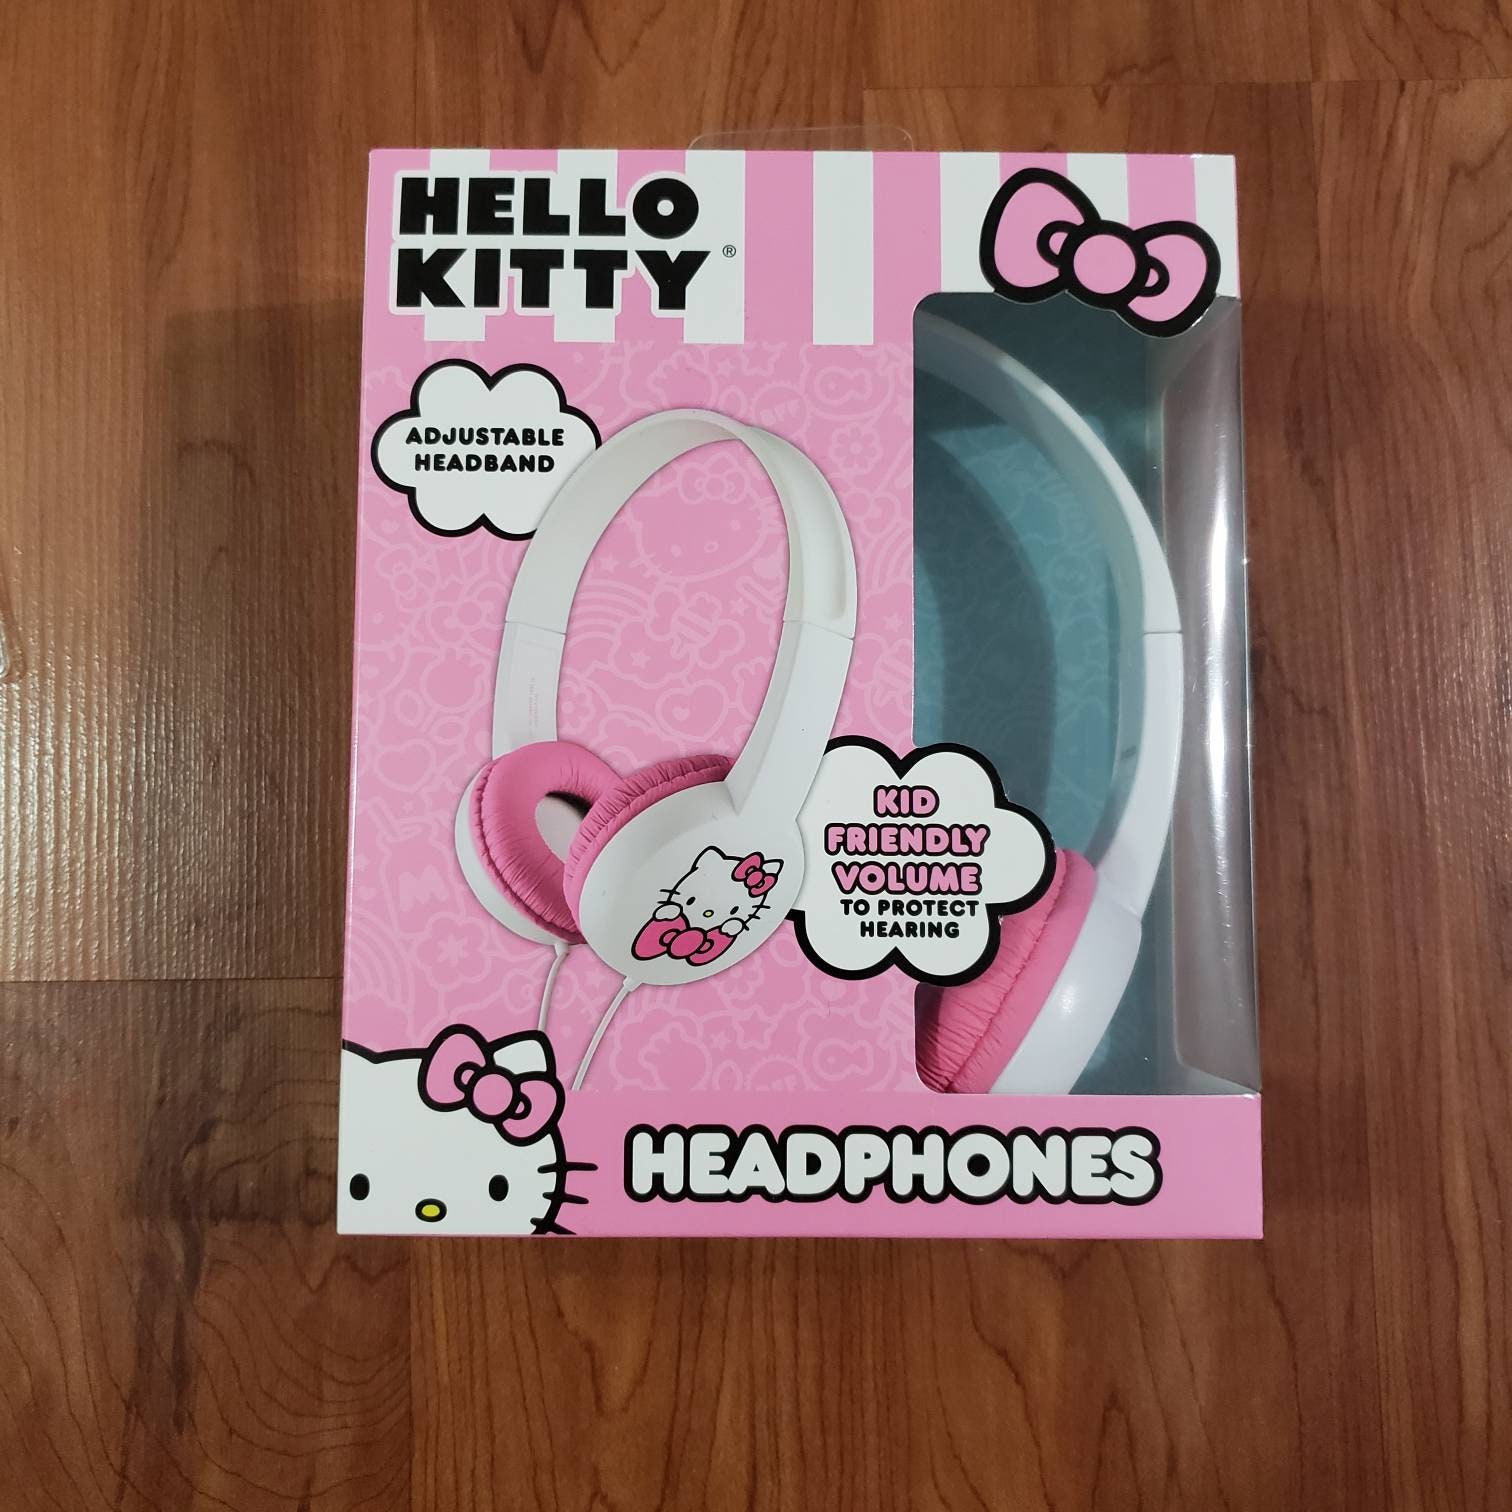 Lot of 7 New Hello Kitty by Sanrio X Creme Silky Sleep Mask Face Mask  Notebook Nail Files Headband Headphones Limited Edition Gift 